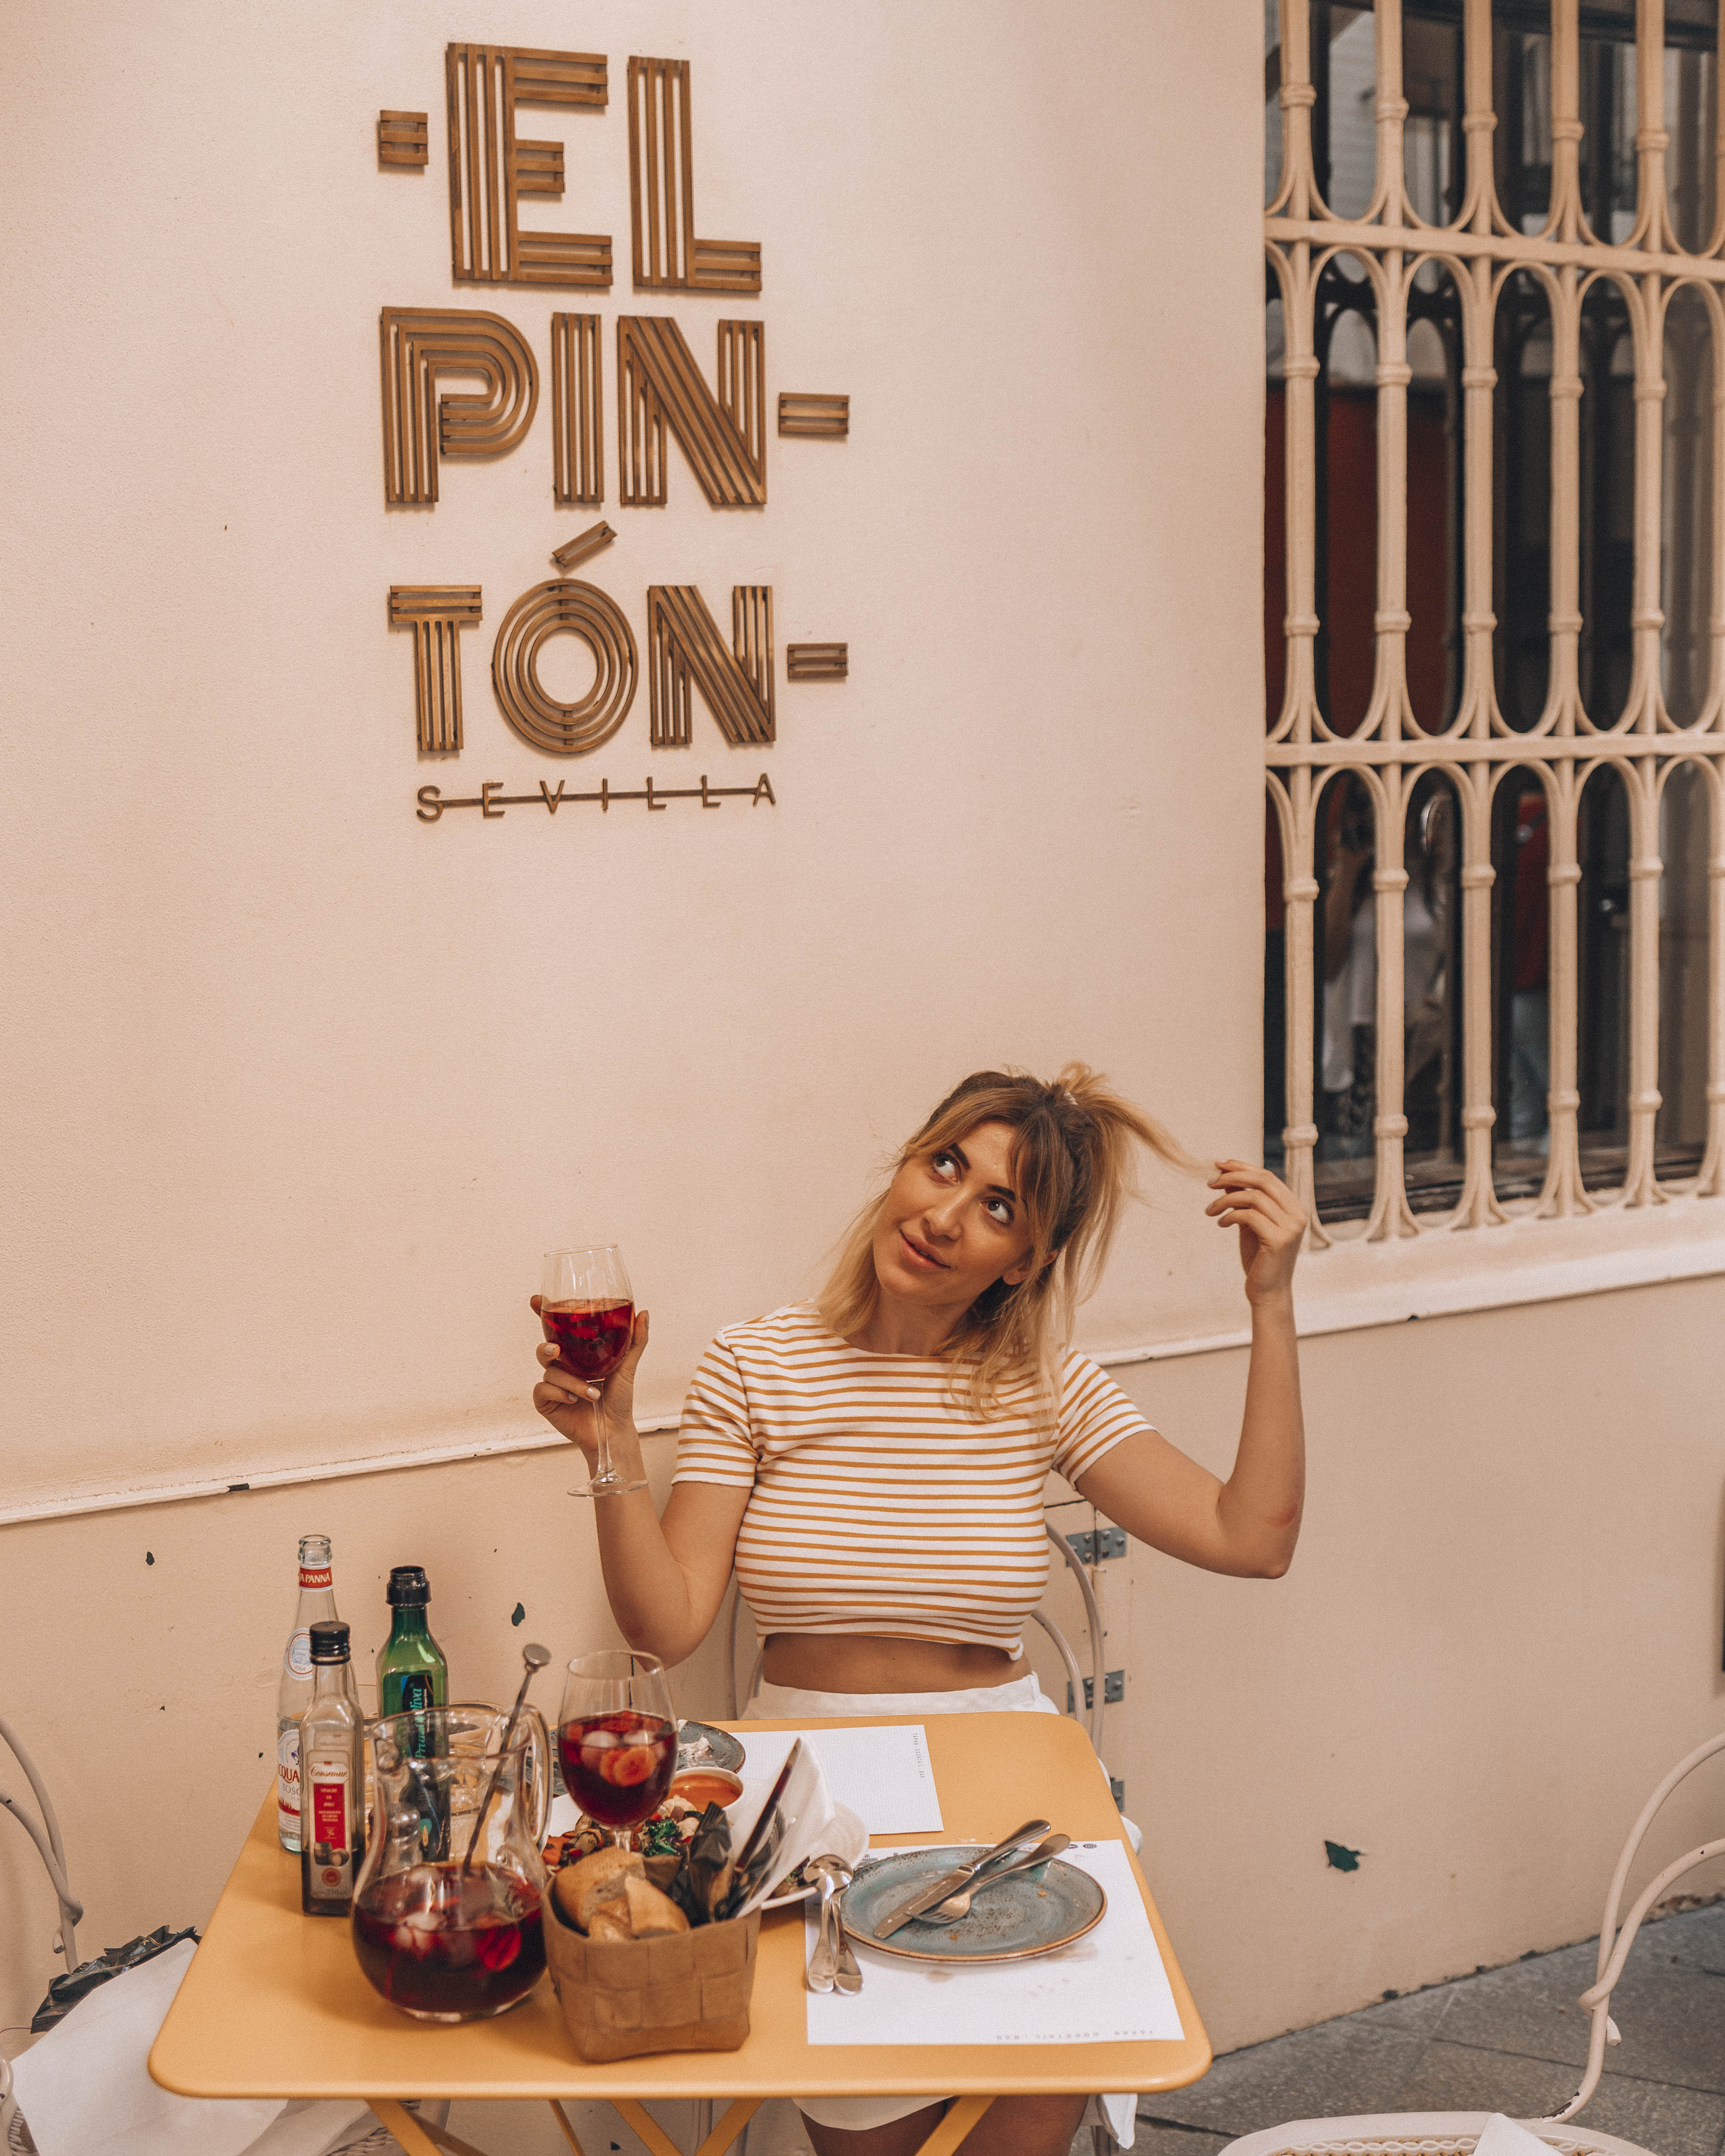 El-Pinton-2-of-4 Seville Food Guide - A must try restaurants